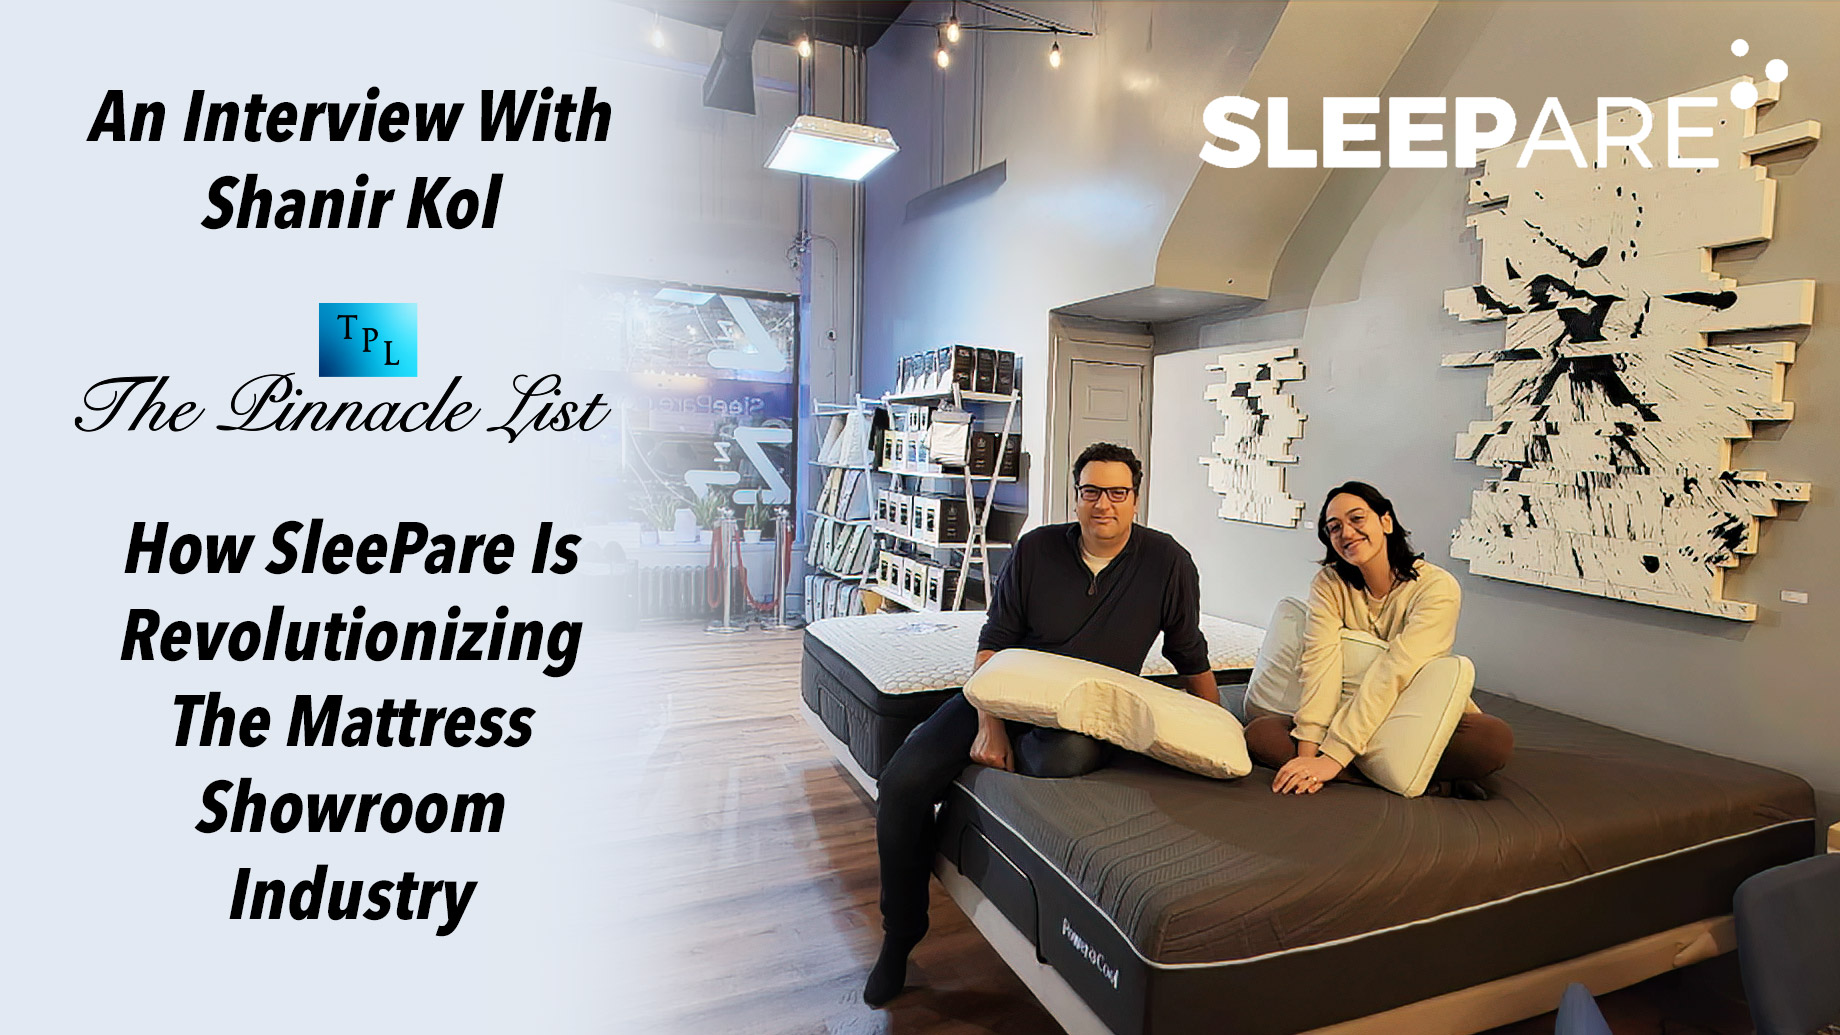 An Interview With Shanir Kol - How SleePare Is Revolutionizing The Mattress Showroom Industry